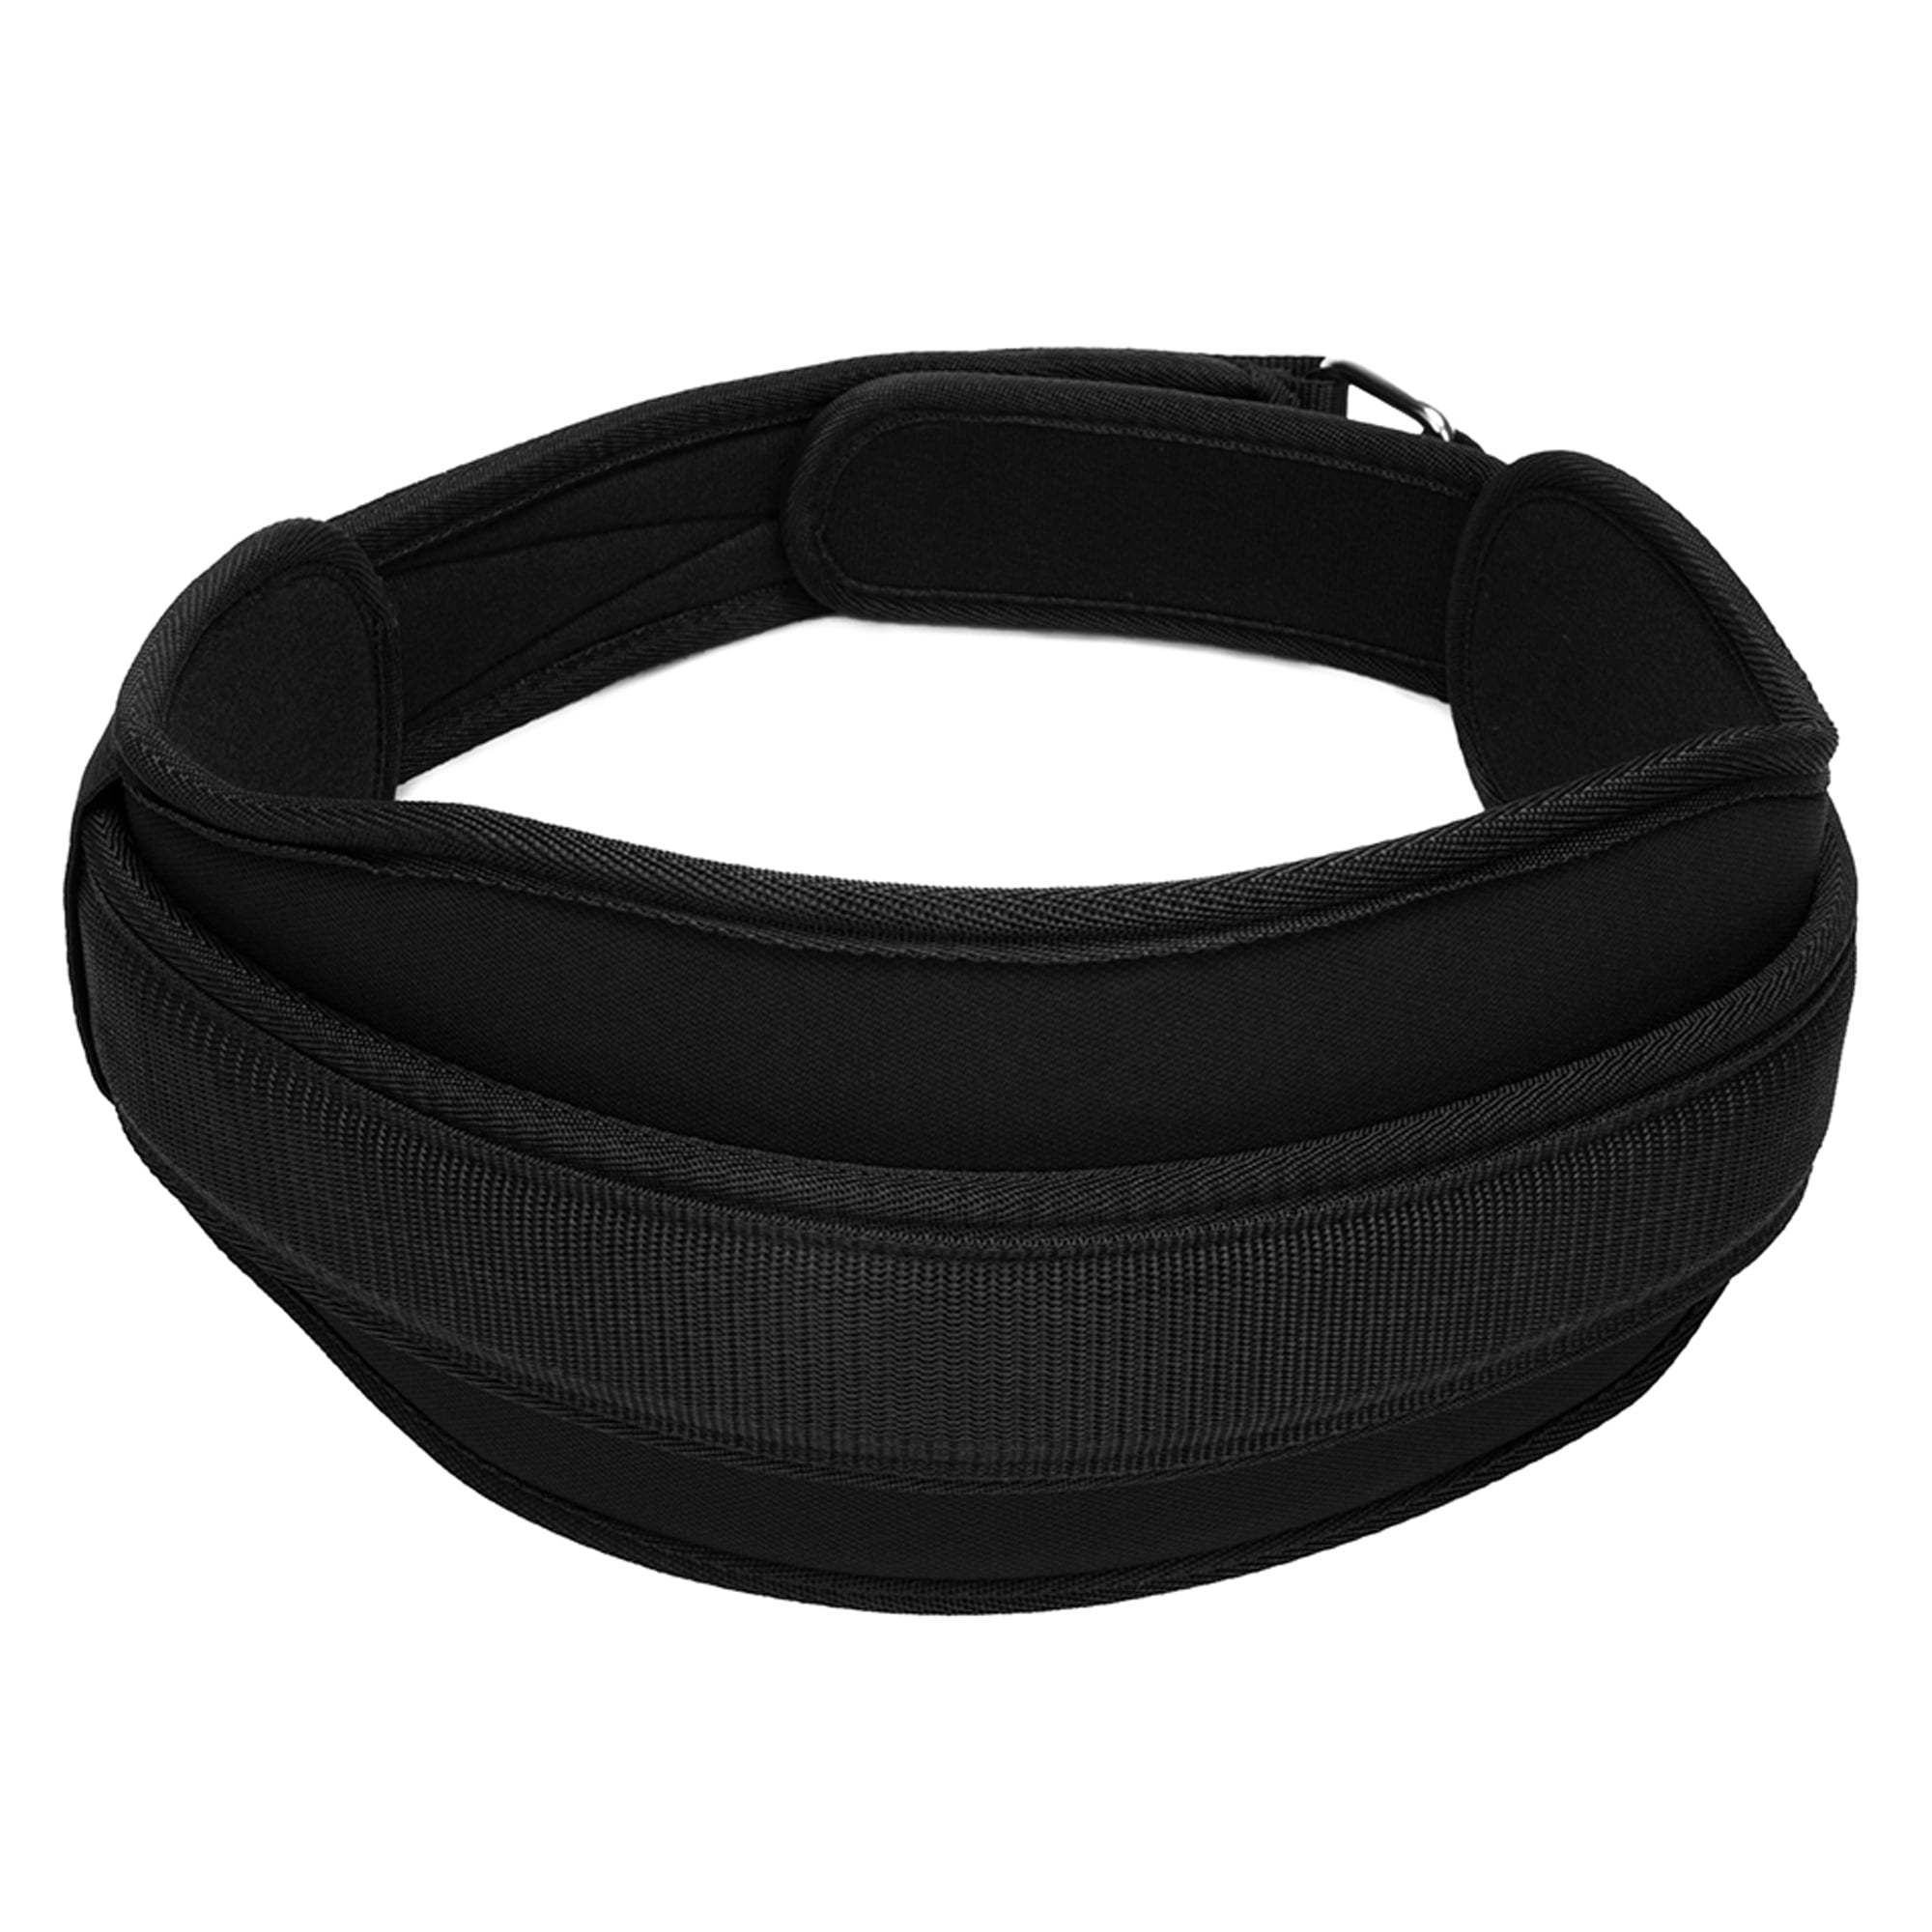 Neoprene Weight Lifting Belt 5.5" Back Support Fitness Training Power Gym Strap